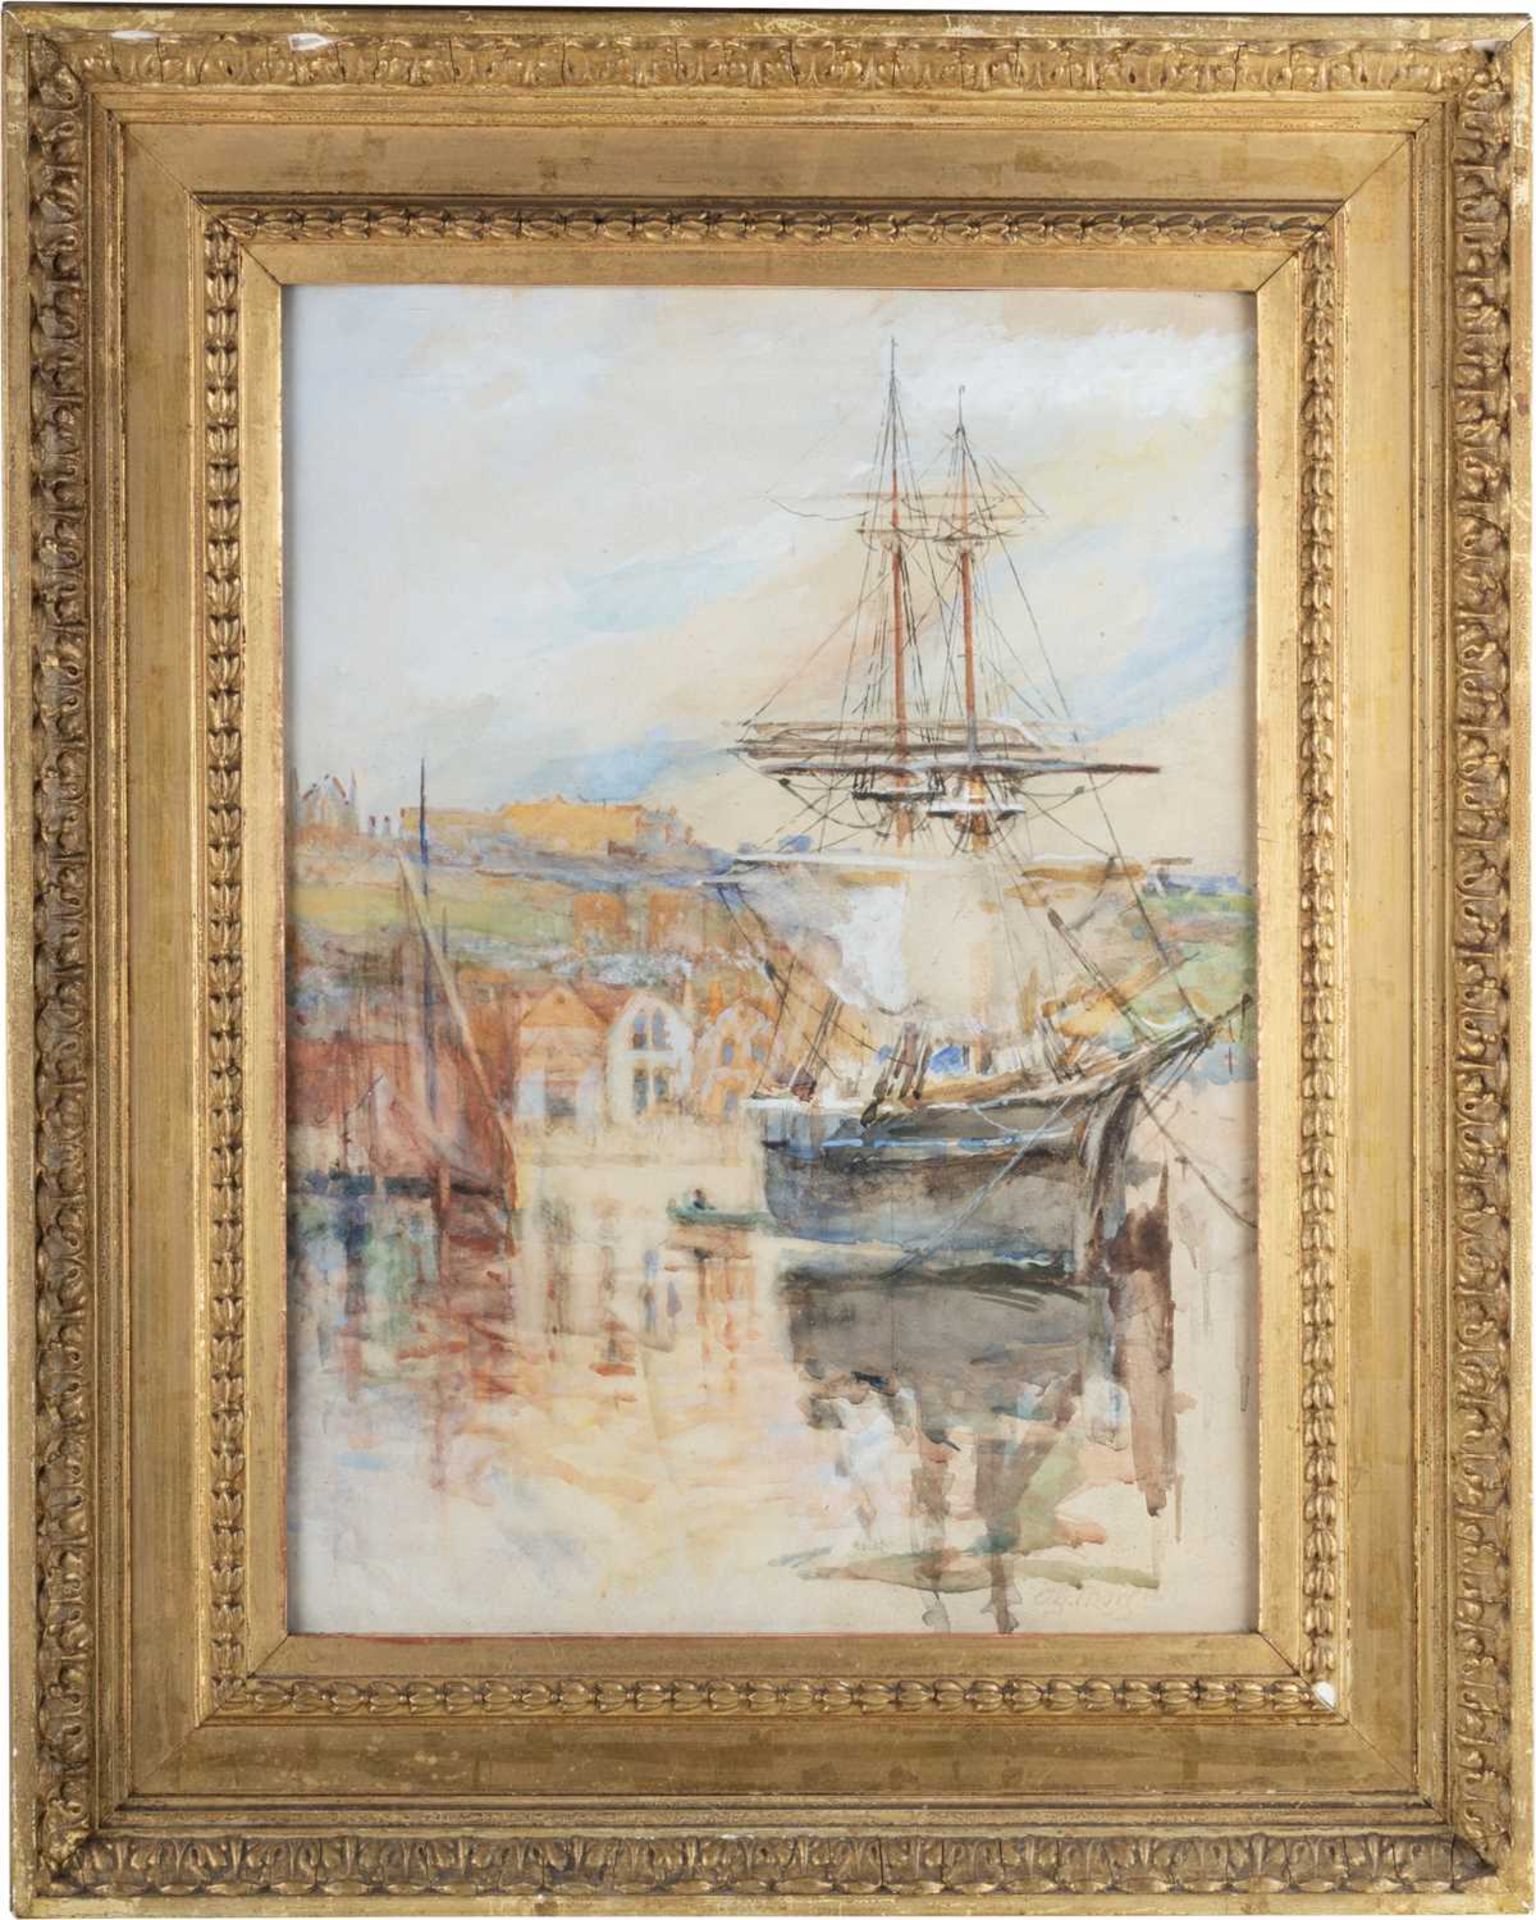 ALFRED GEORGE MORGAN (1848-1930) PAIR OF VIEWS OF SHIPS AT WHITBY - Image 2 of 5